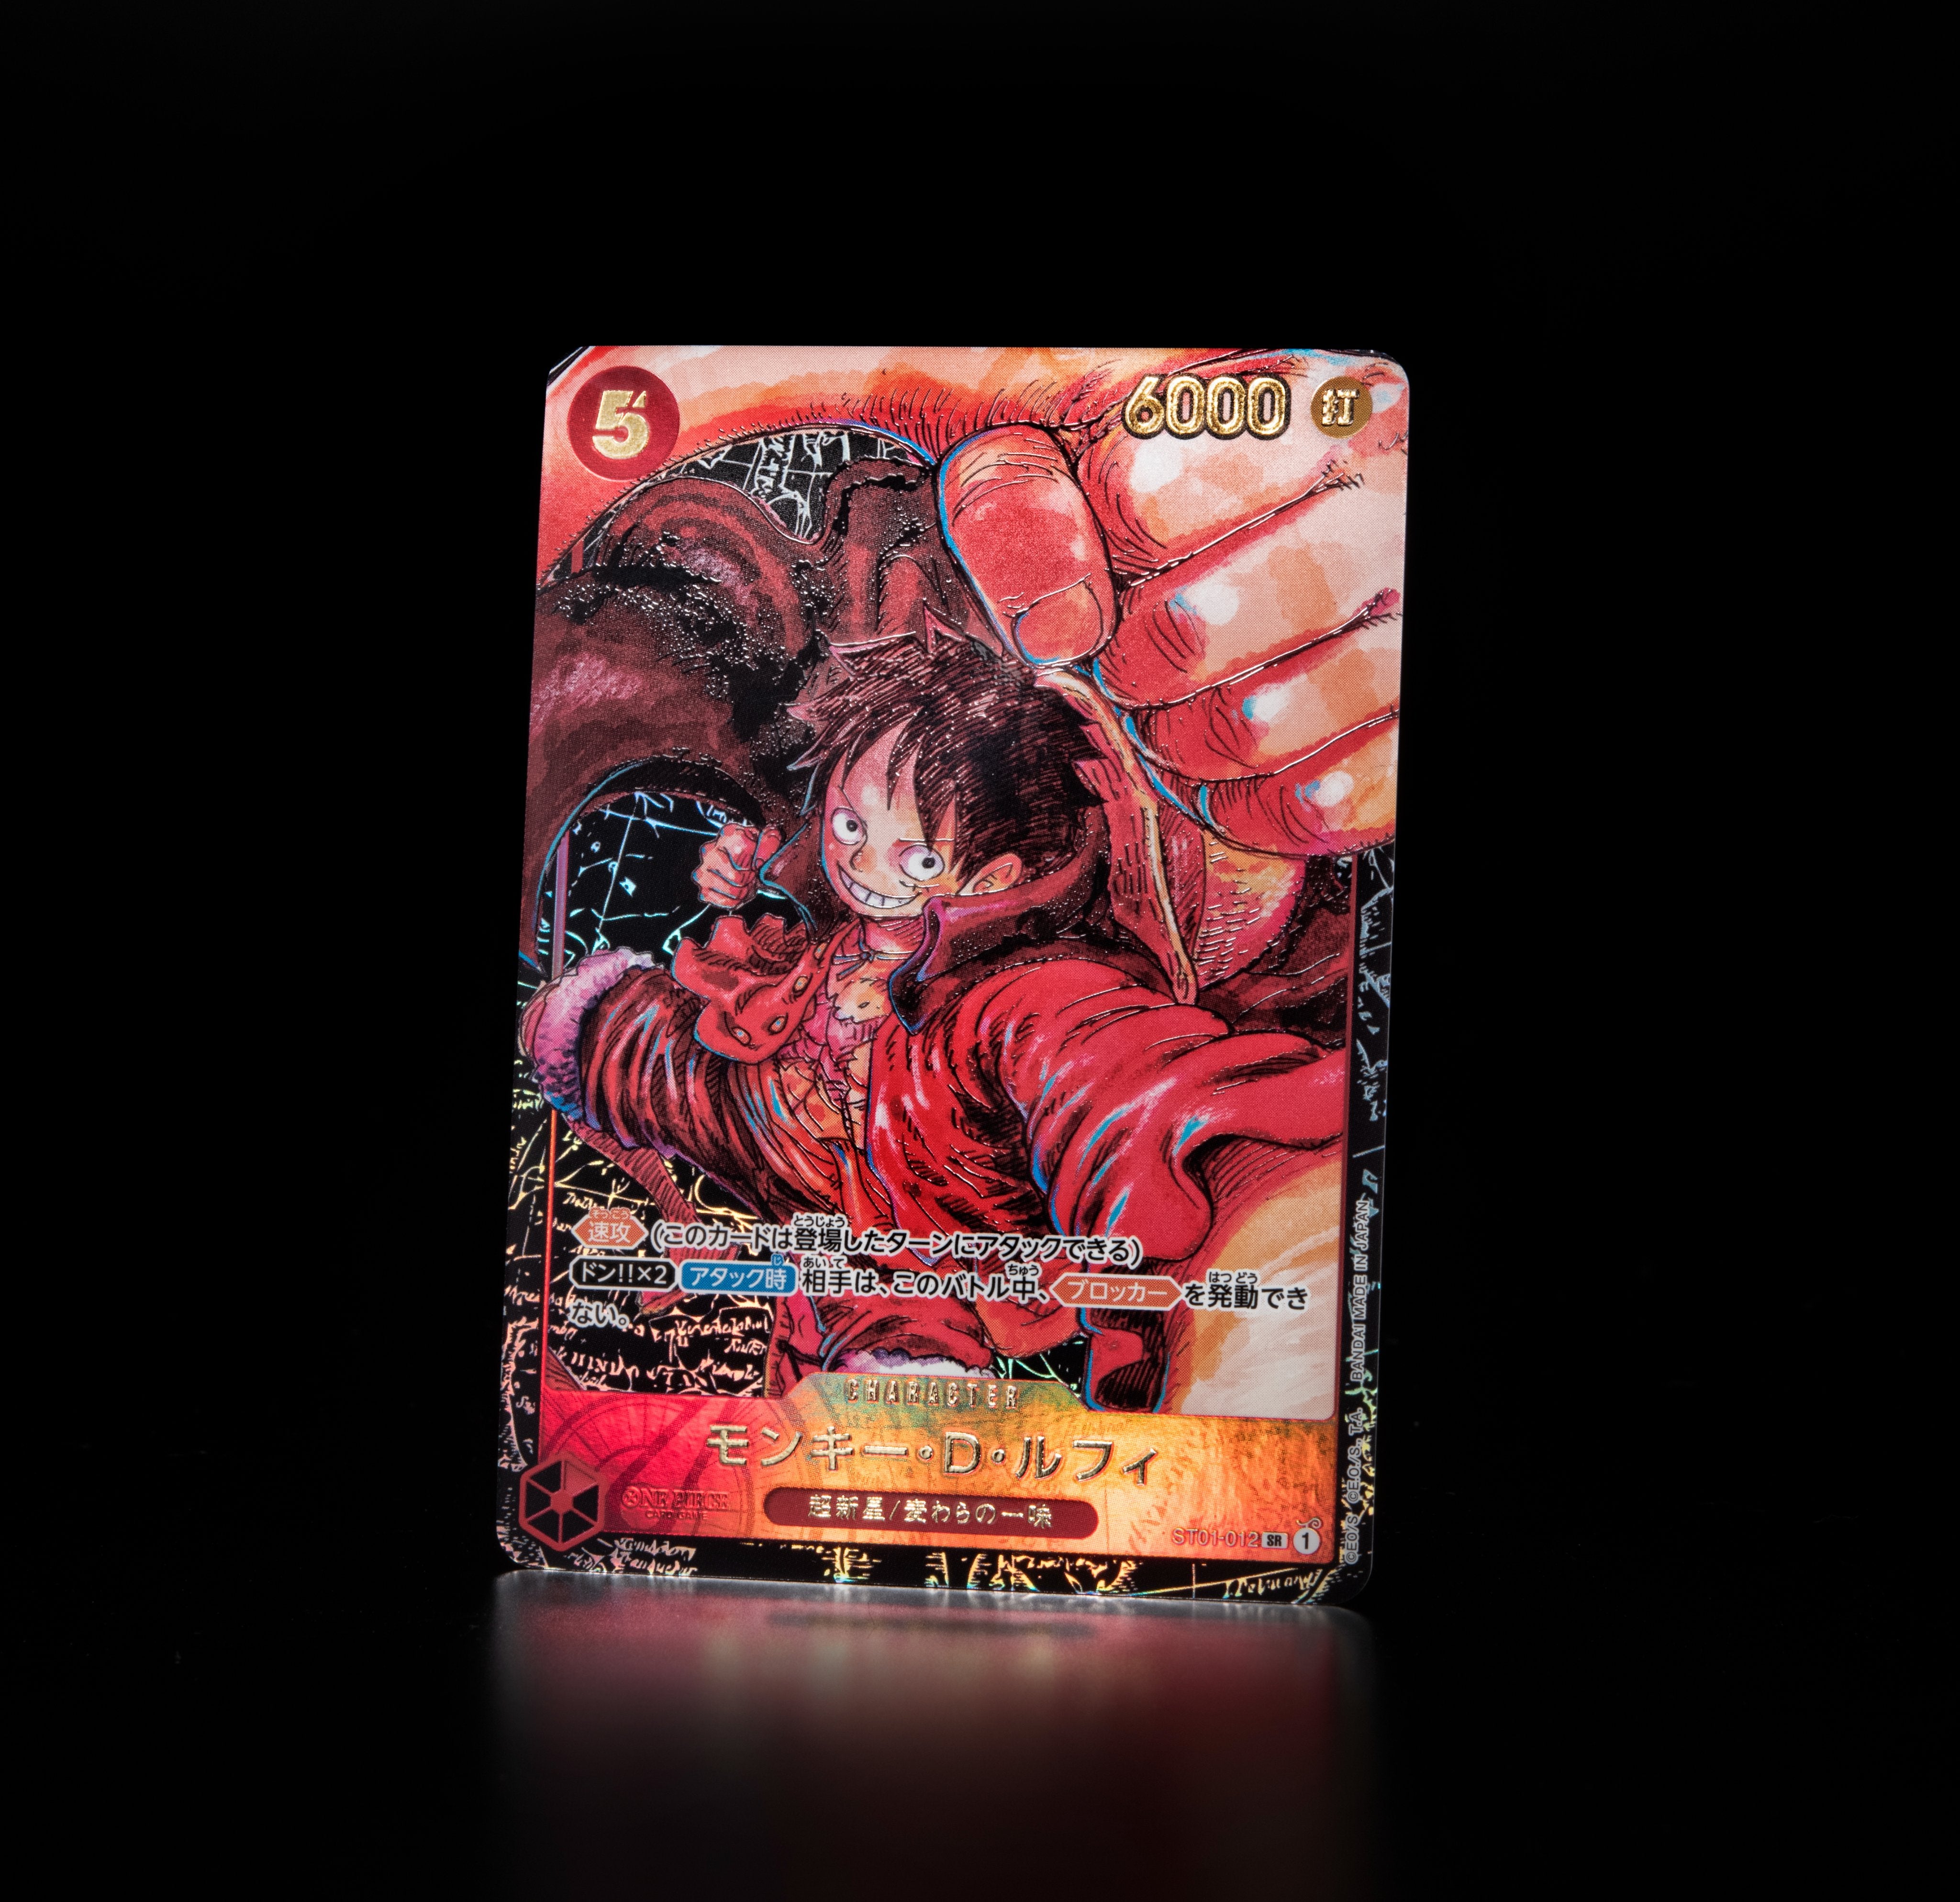 ONE PIECE CARD GAME - ST01-012 SR